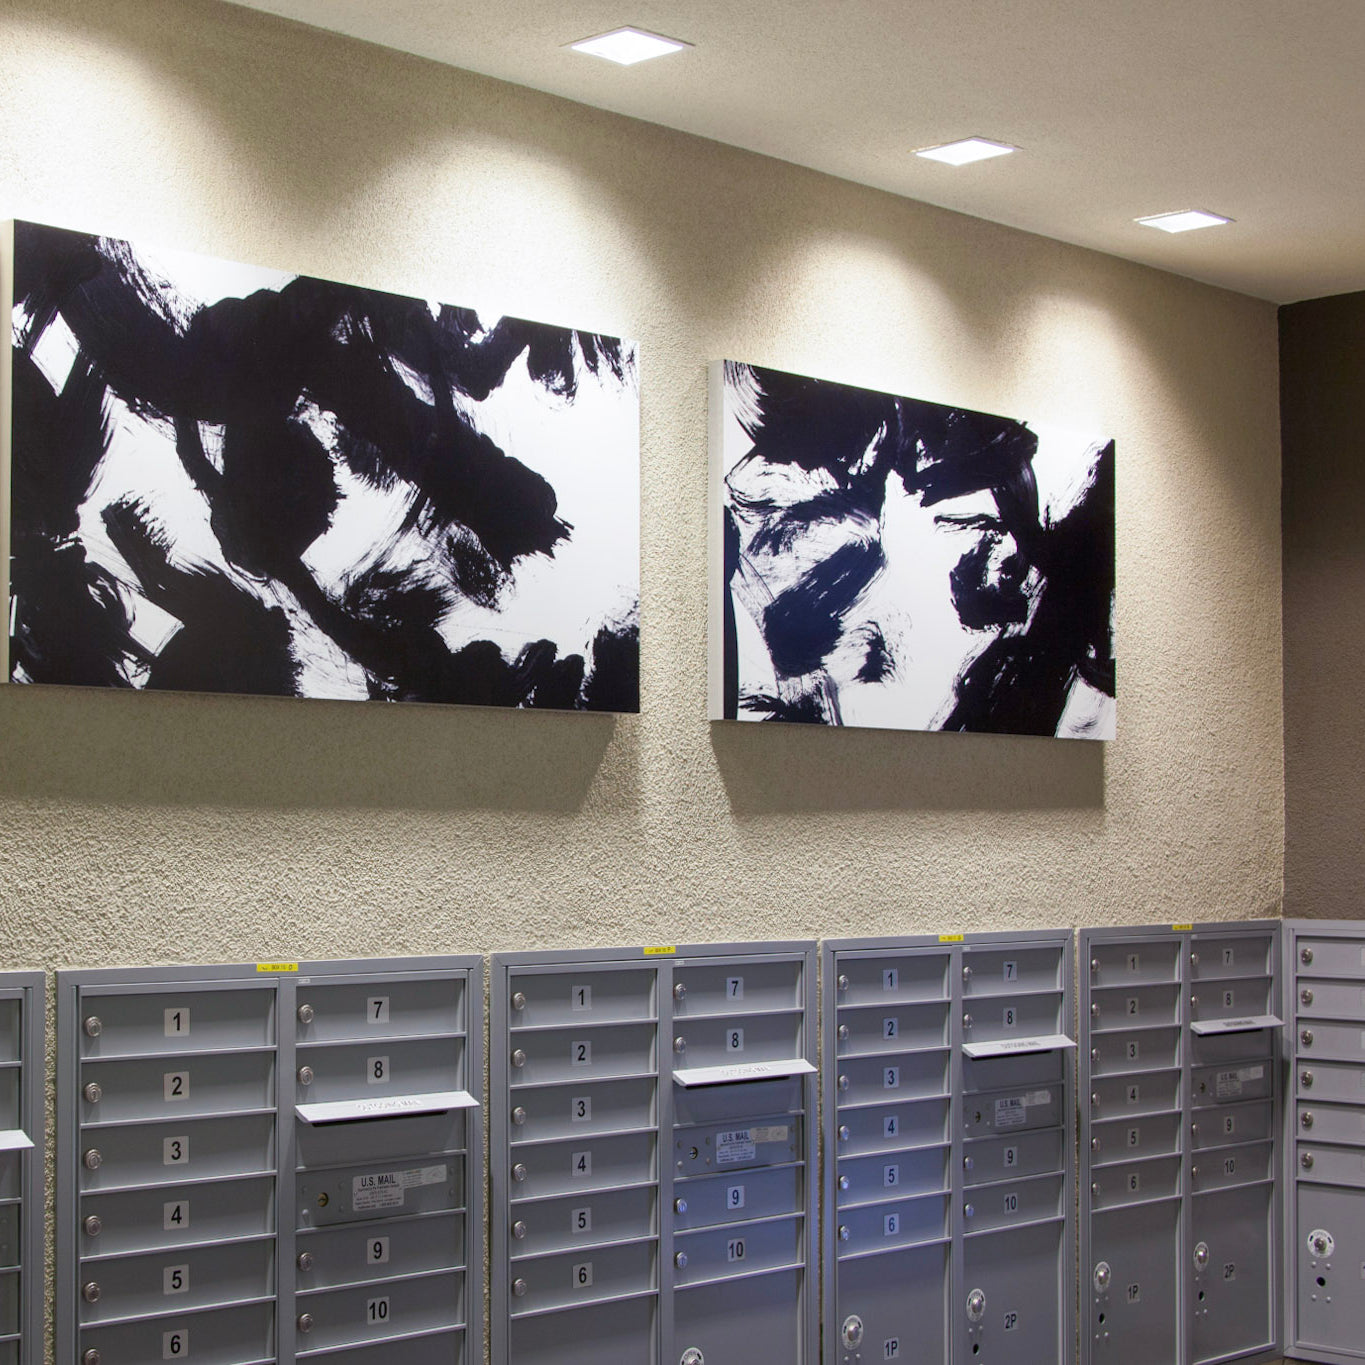 Multifamily apartment mailroom at Alexan Aspect with black and white dynamic canvases above mailboxes, crafted by WRAPPED Studios.